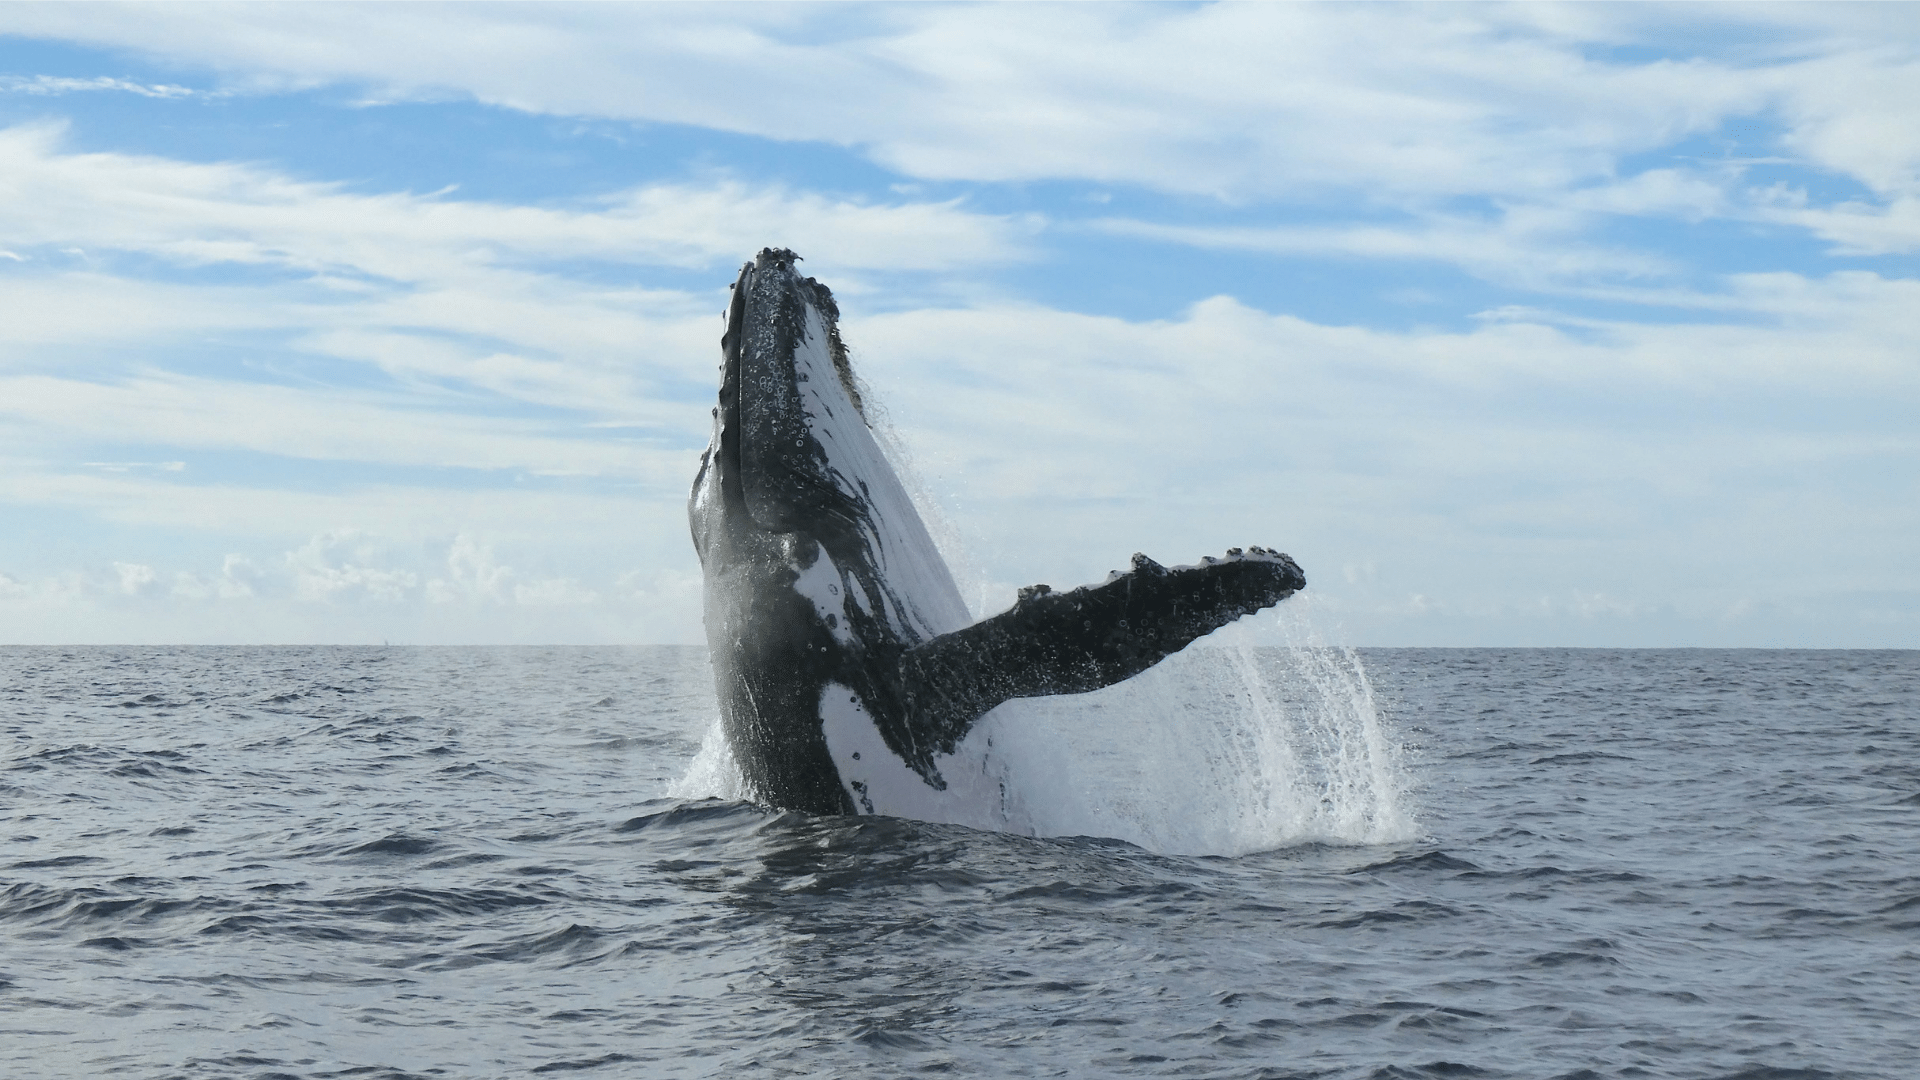 Humpback whale breaching the ocean surface